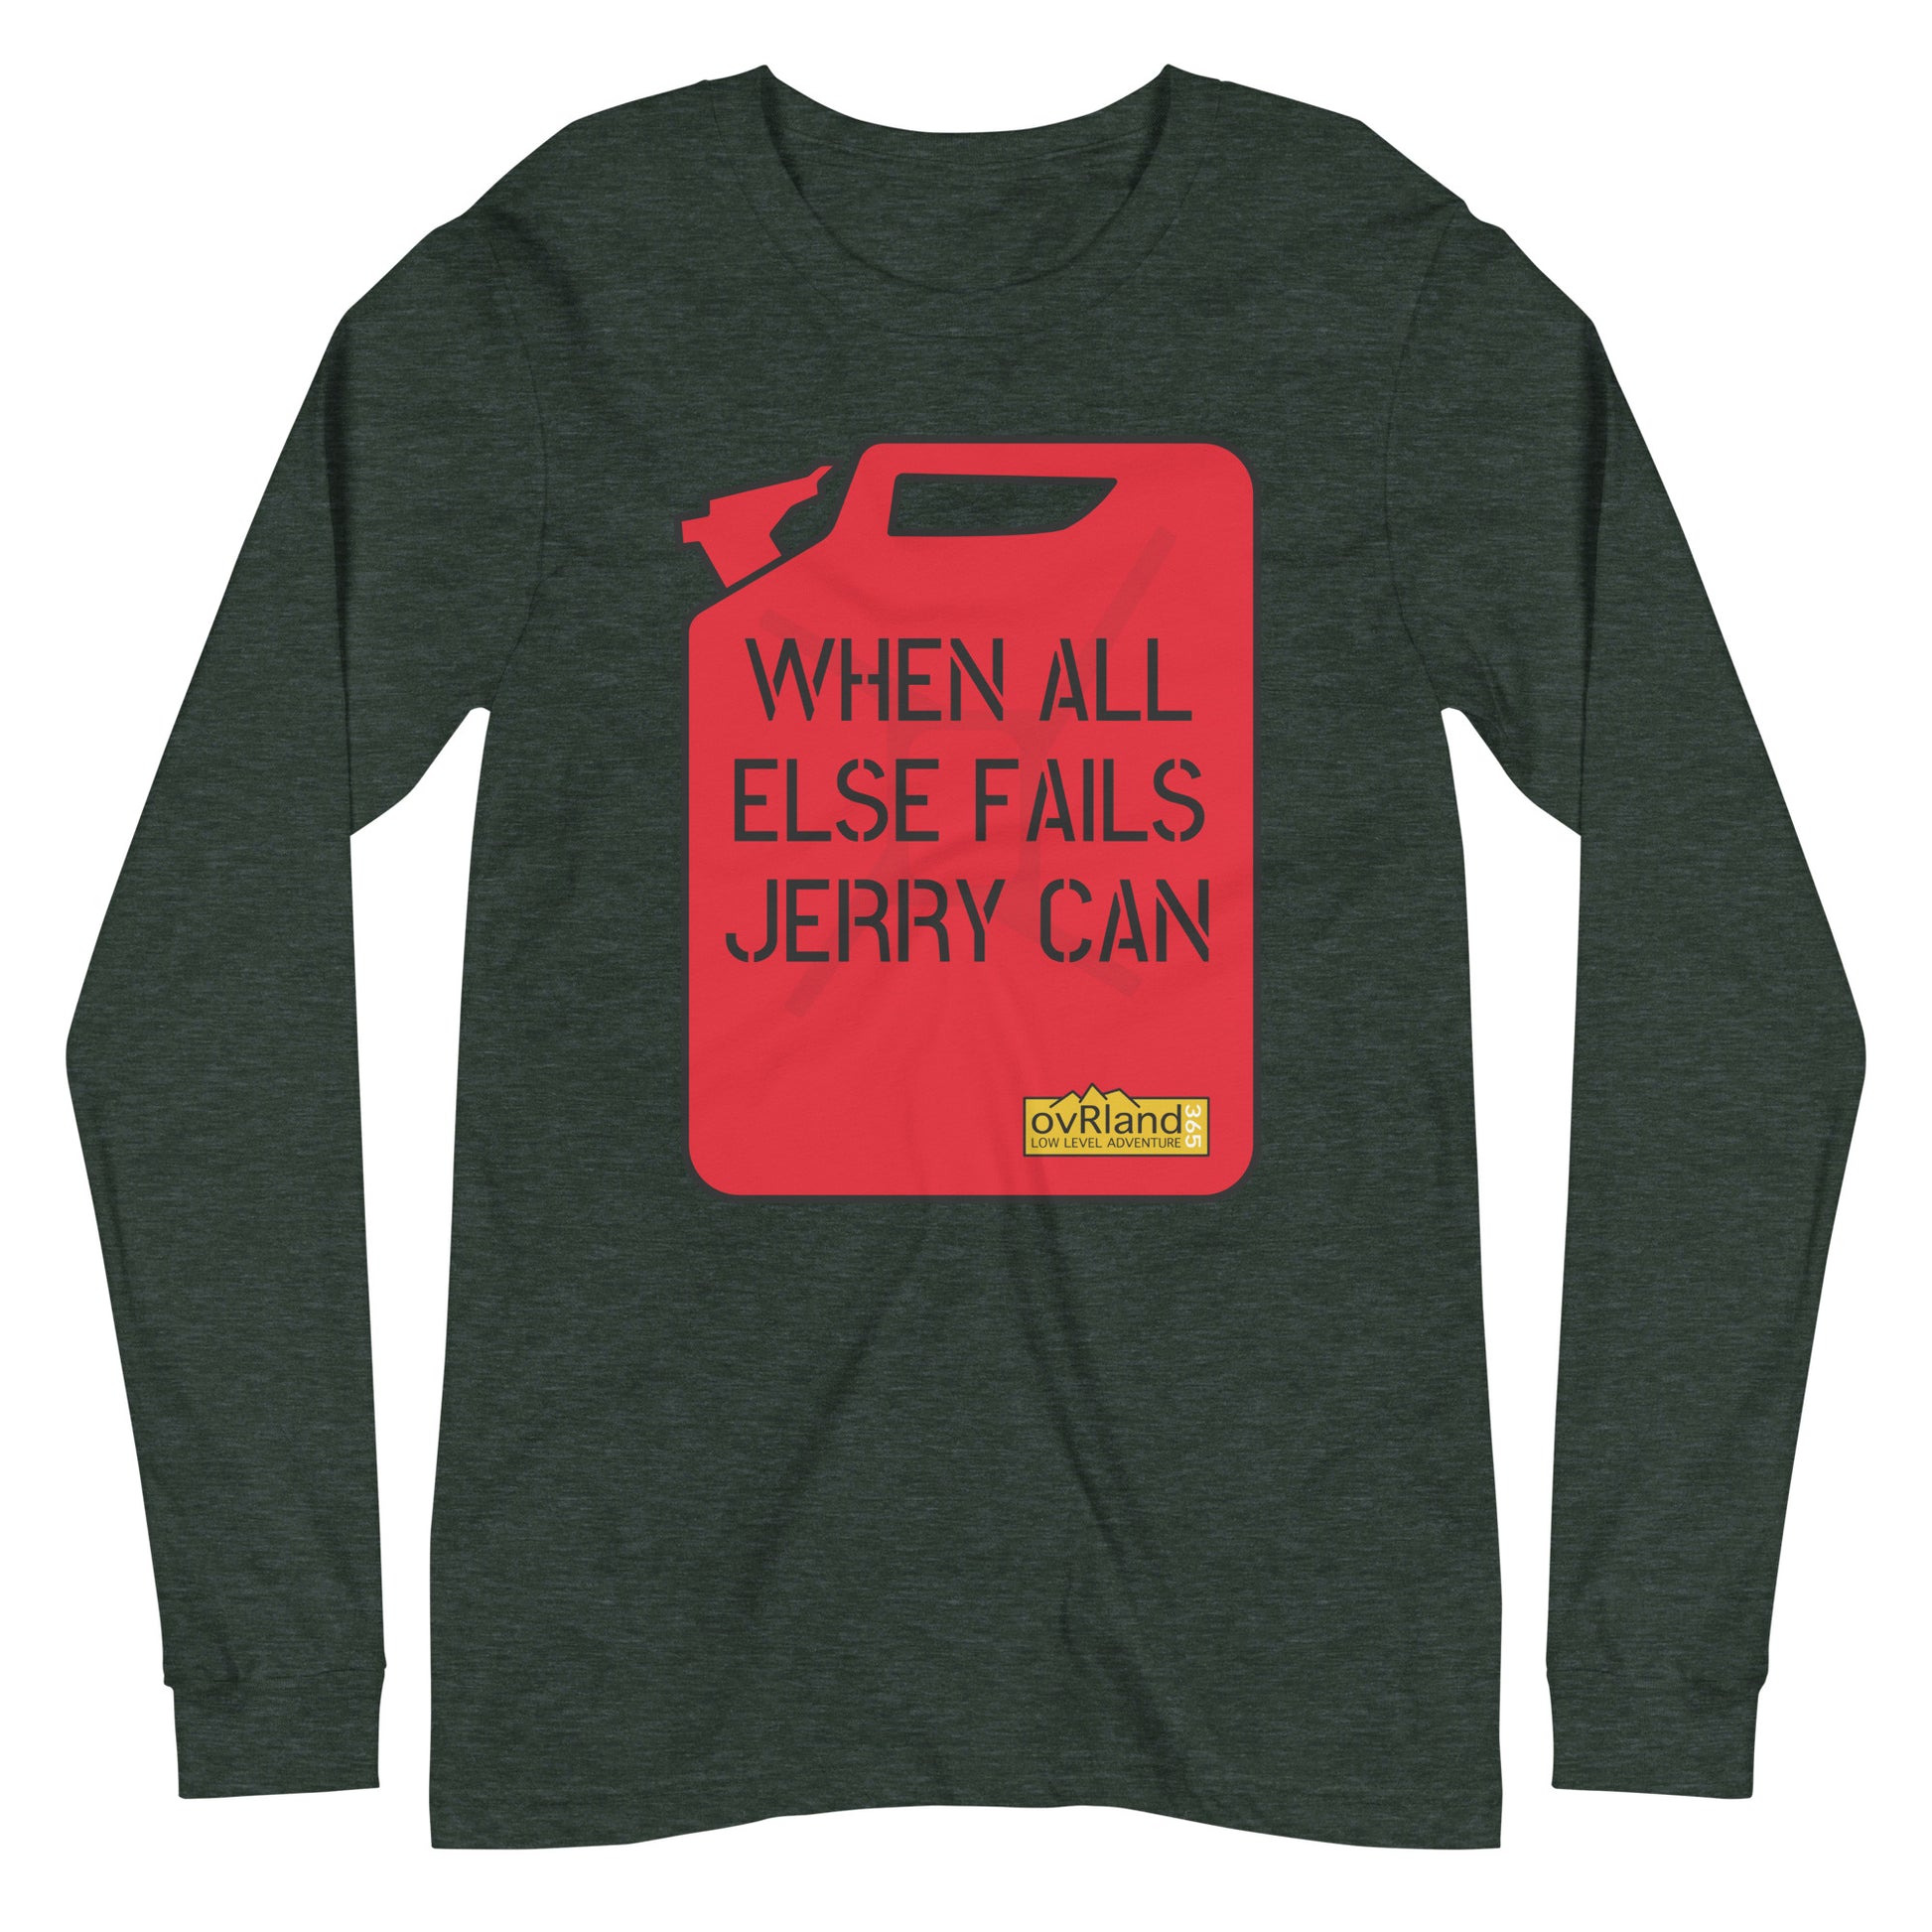 "WHEN ALL ELSE FAILS, JERRY CAN" - Forest long-sleeve. overland365.com